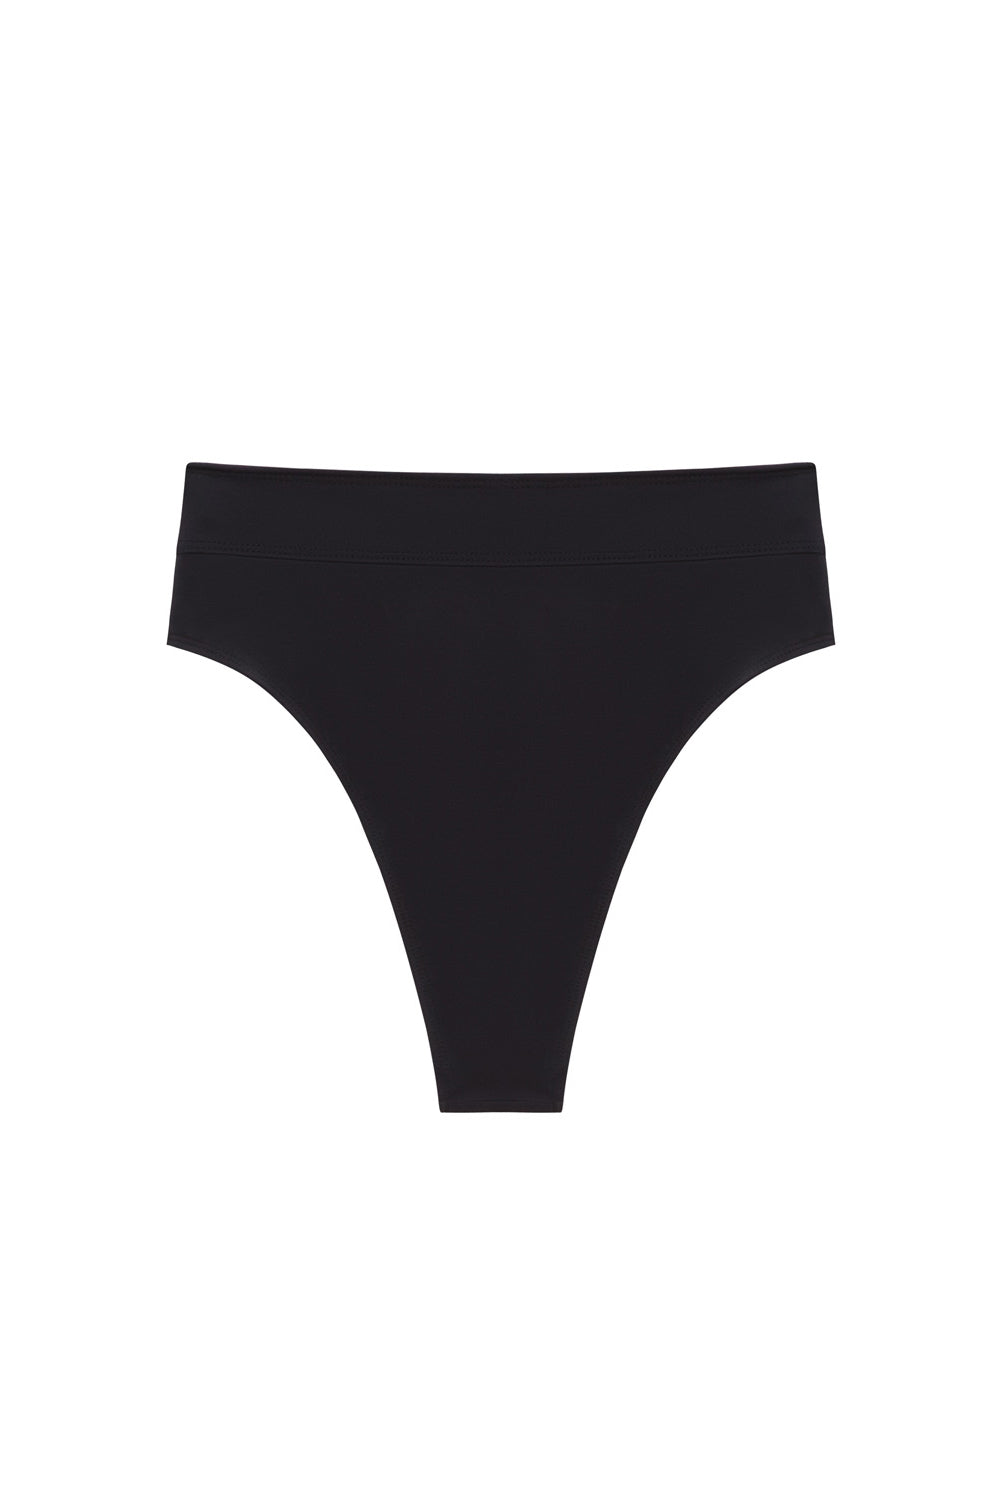 The exhaustive guide to underwear that will sculpt and smooth